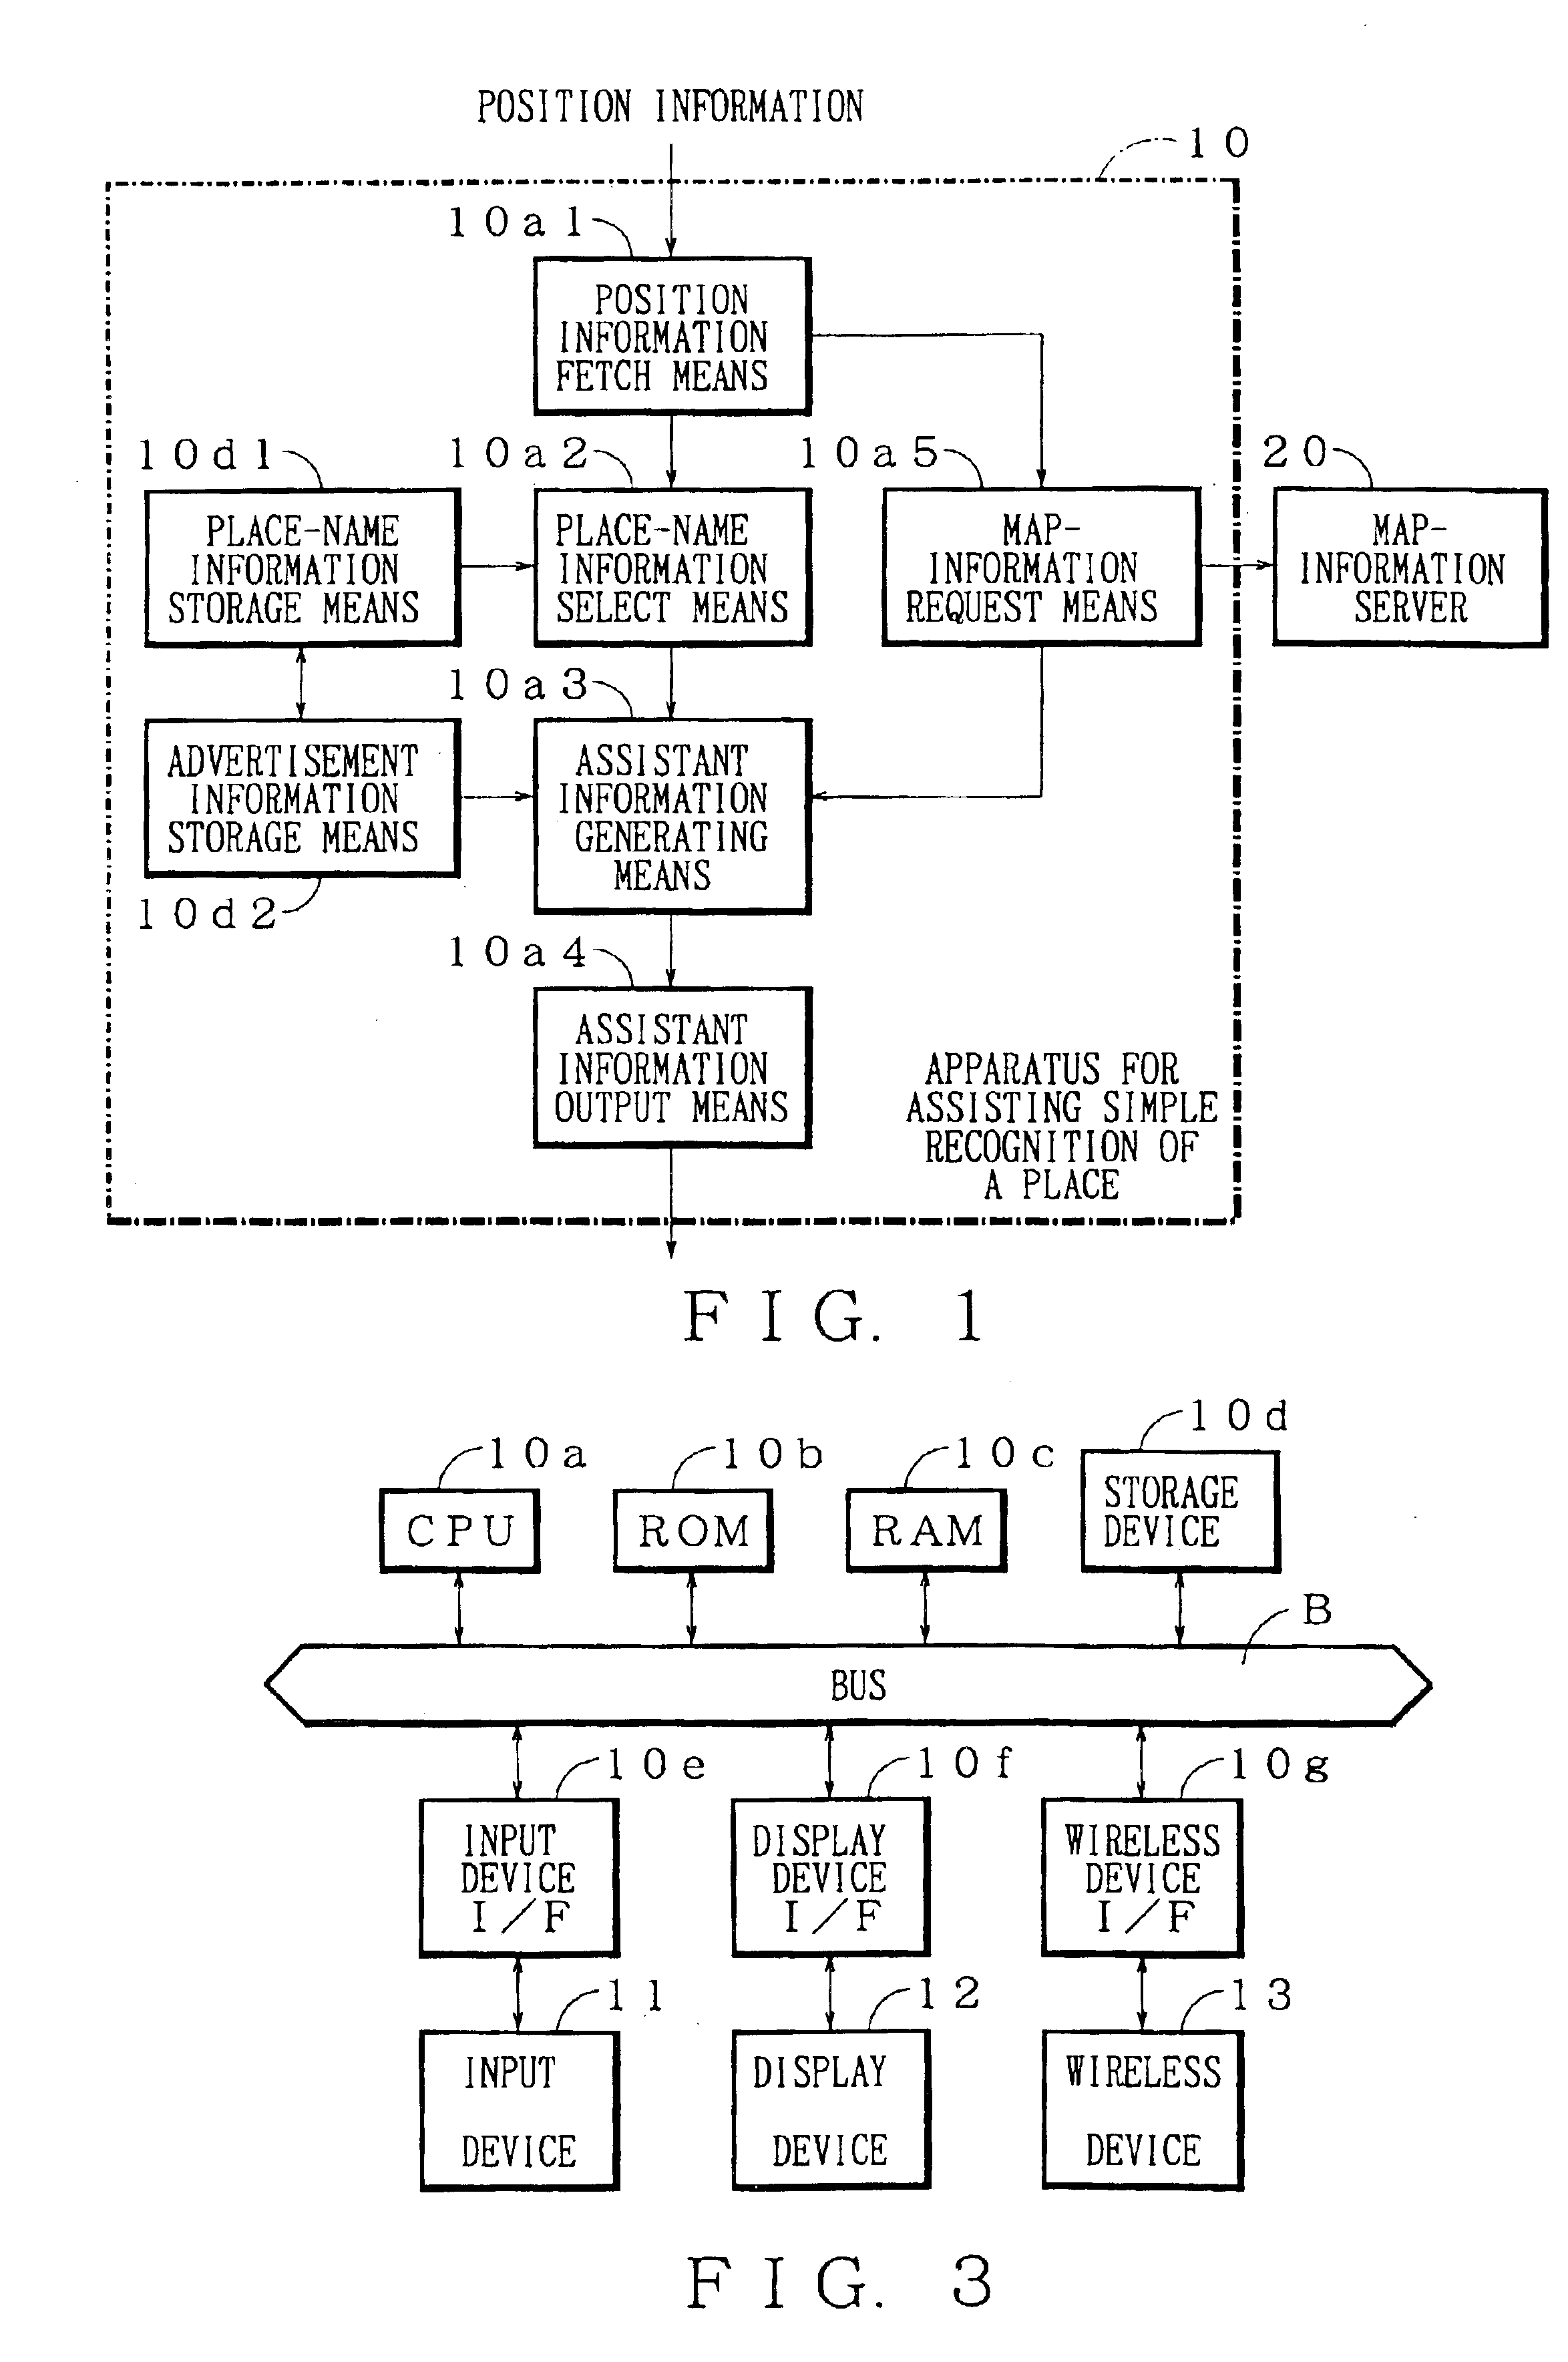 Apparatus for assisting simple recognition of a position and program for assisting simple recognition of a position